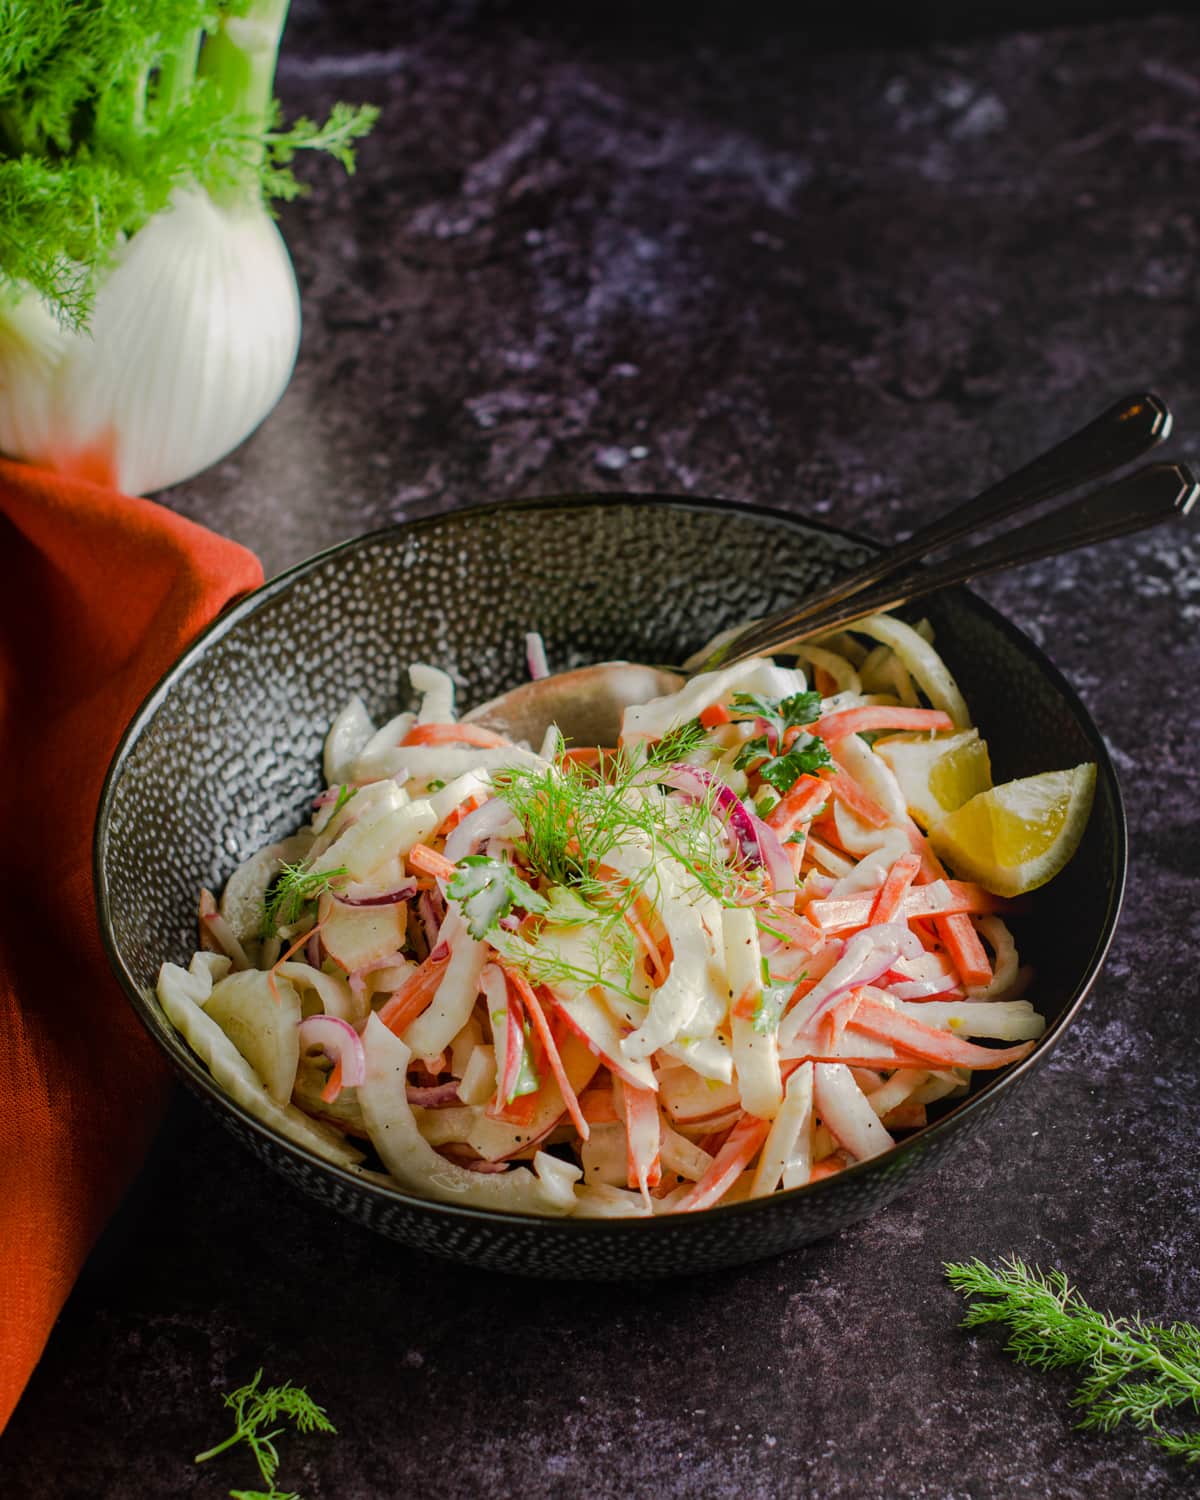 A dark table setting with a bowl of coleslaw filled with fennel, apple and carrot, with sprigs of fennel scattered and an orange coloured linen.